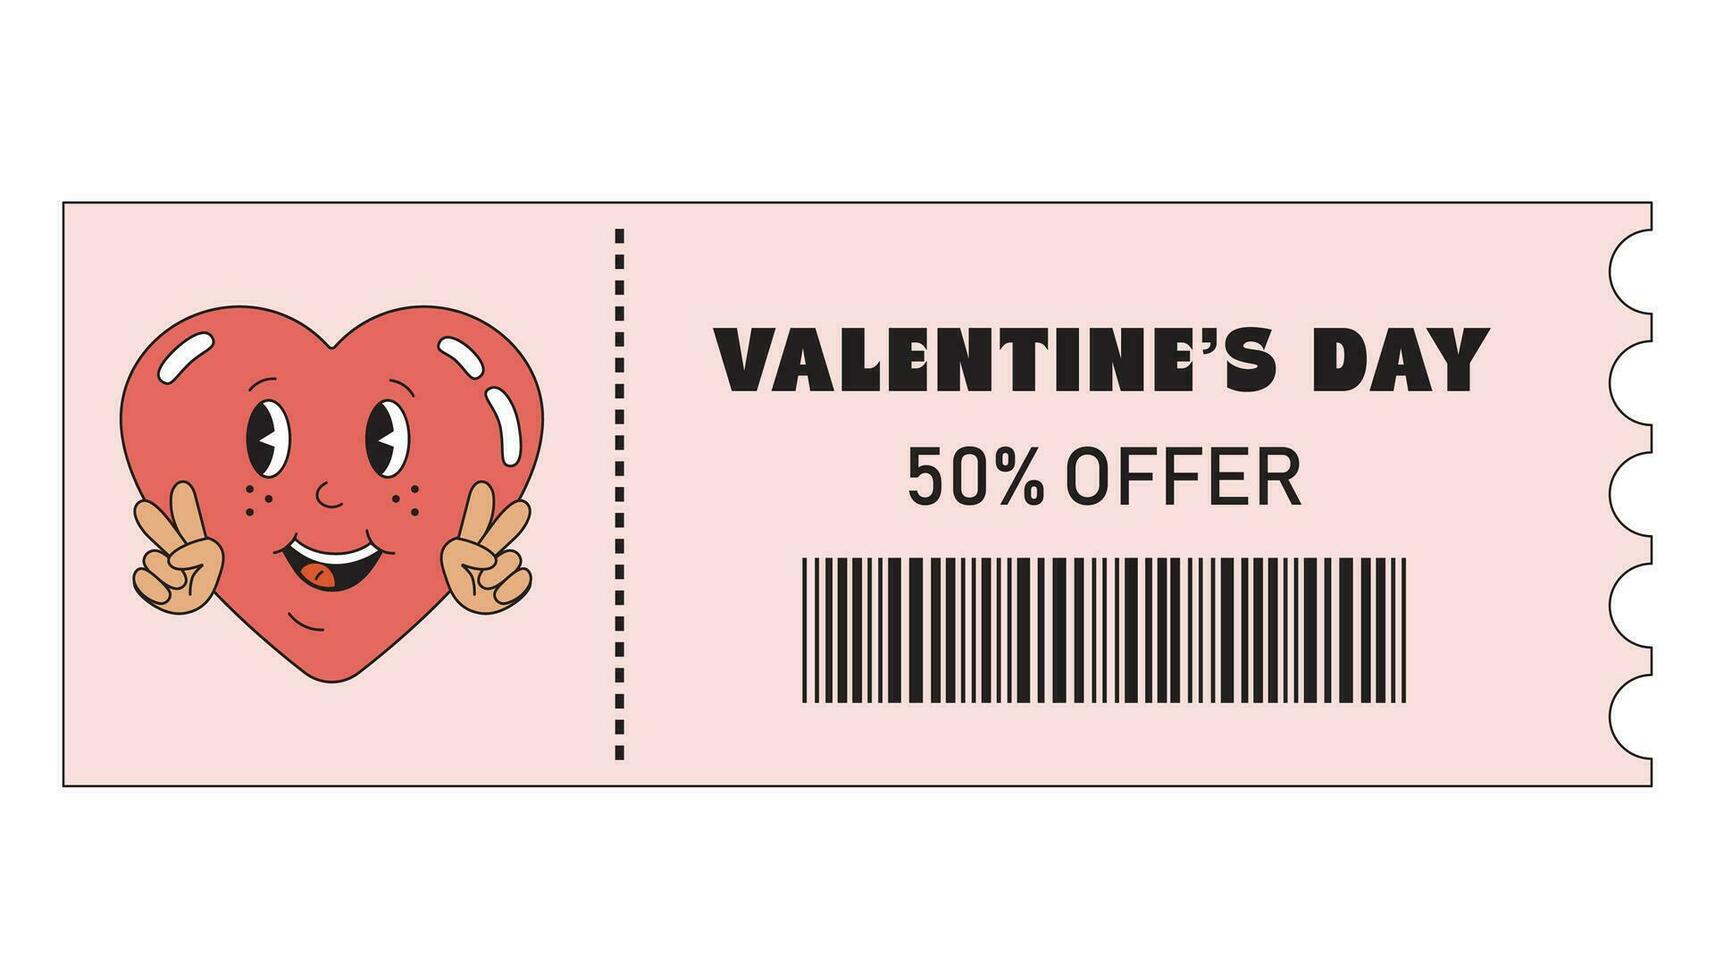 Valentines day coupon. Valentine sale, special offers, discounts coupons for shopping, gifts, restaurants, cinemas, cafes. Love ticket, discount in groovy retro style. vector